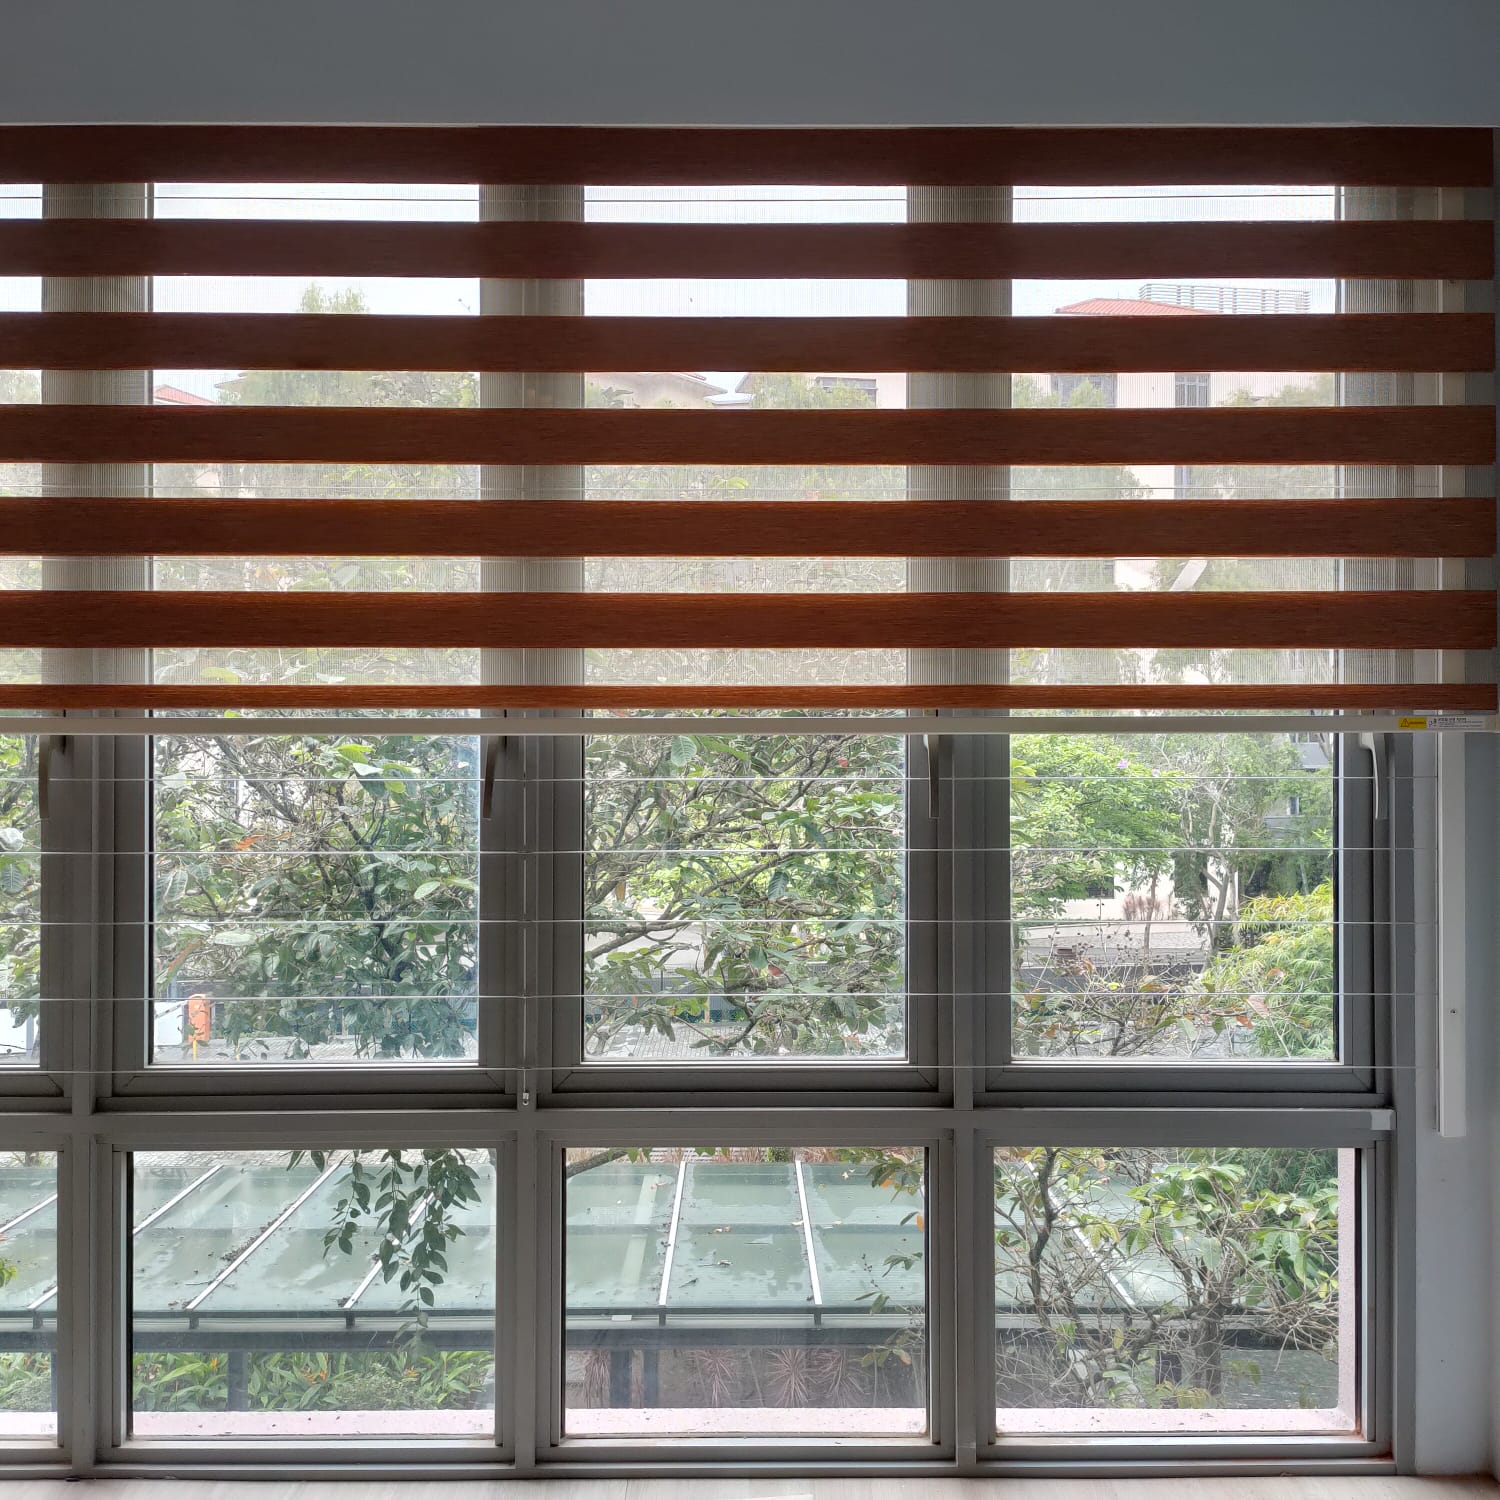 This is a Picture of Korean Combi Blinds with Invisible grille at Singapore condo,26 Flora Drive